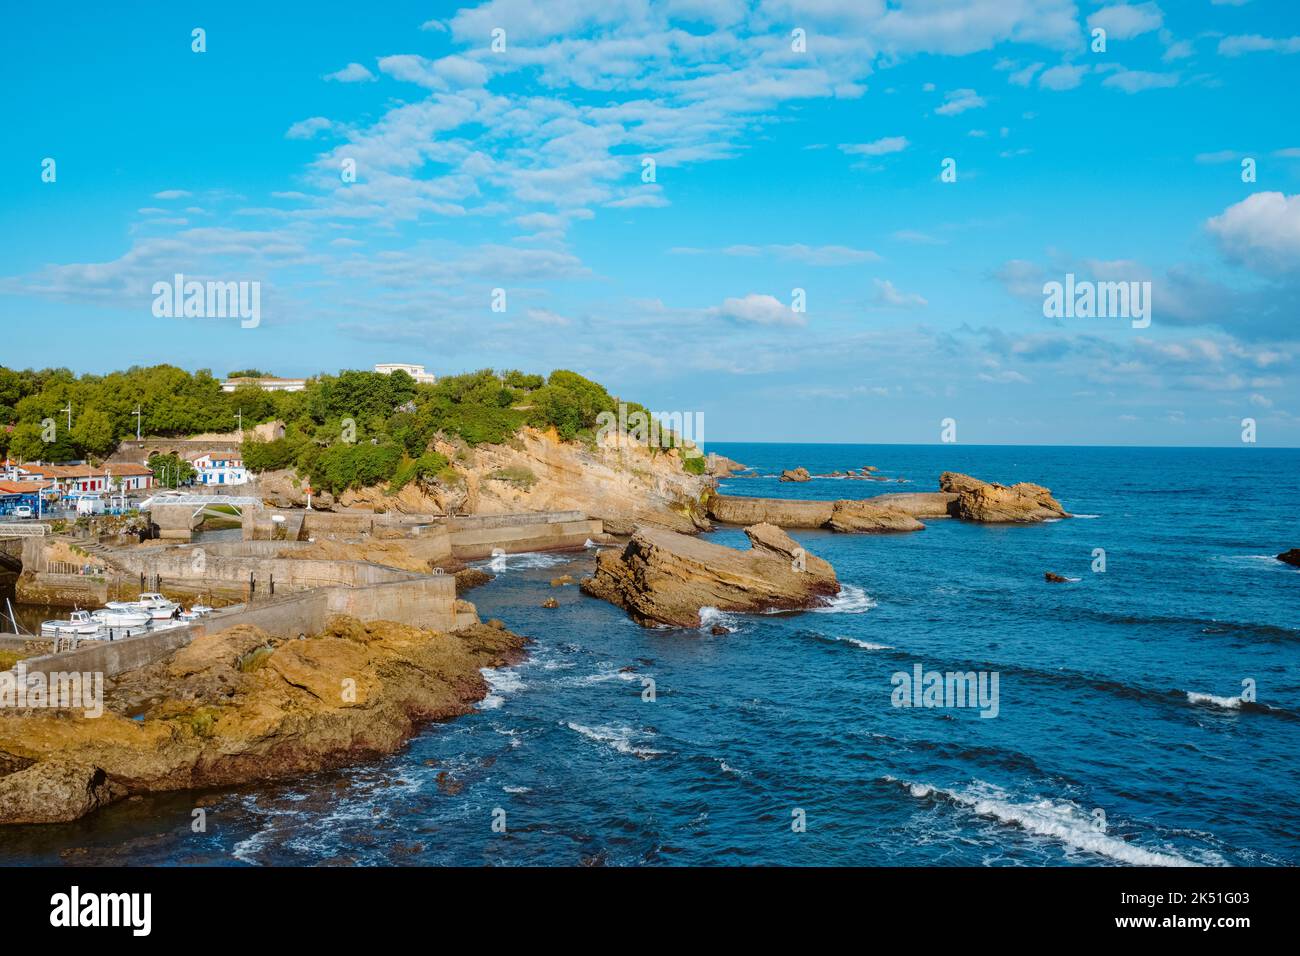 Biarritz, France - June 24, 2022: A view of the Port des Pecheurs, the fishermen port, in Biarritz, France, in this cliffy coast Stock Photo